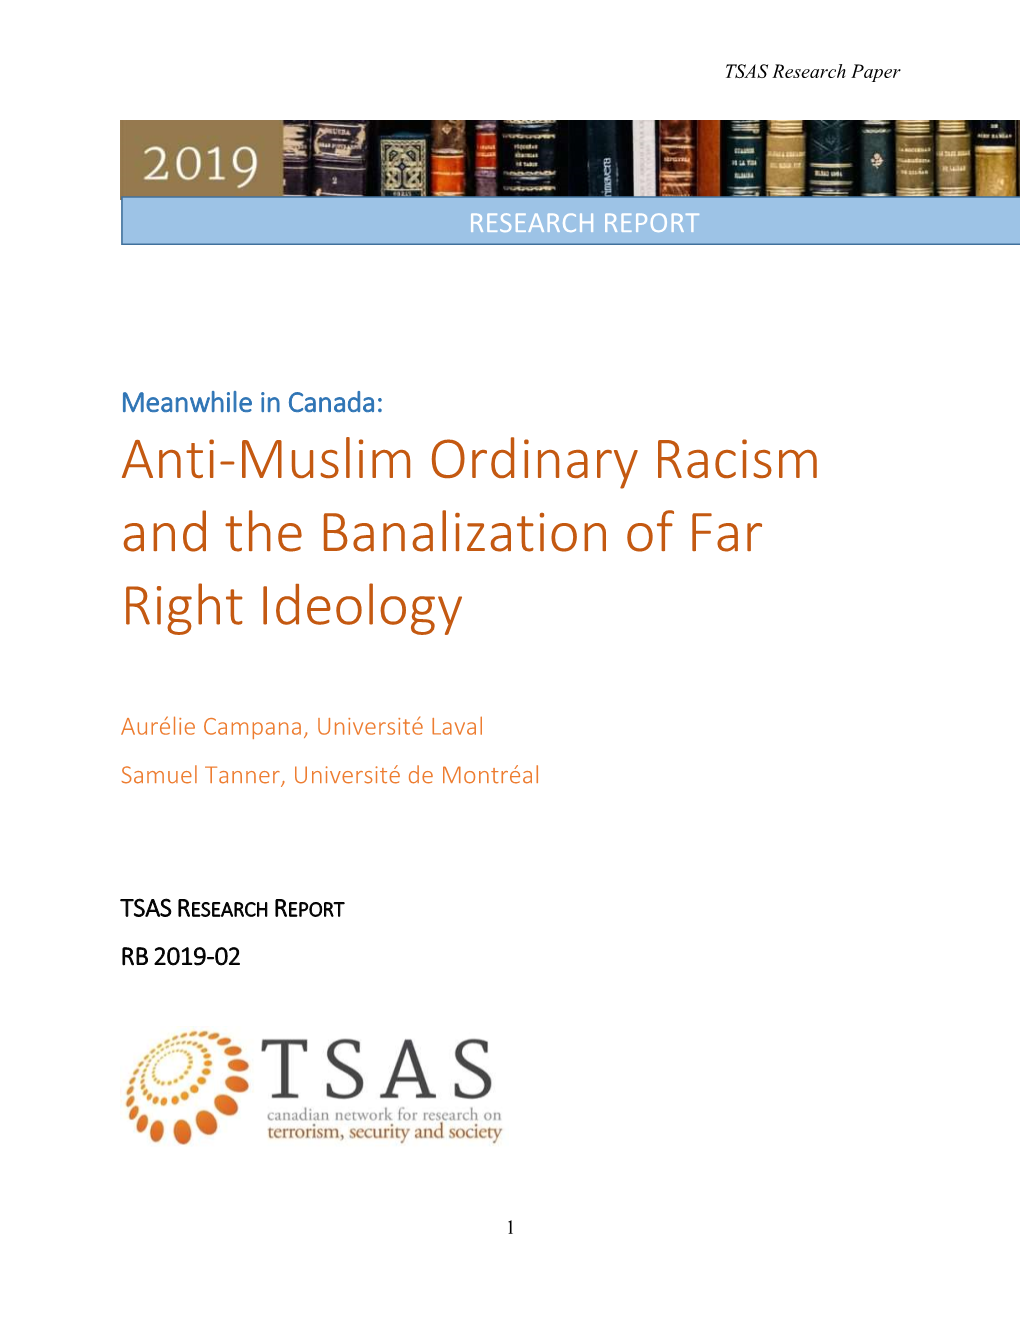 Anti-Muslim Ordinary Racism and the Banalization of Far Right Ideology